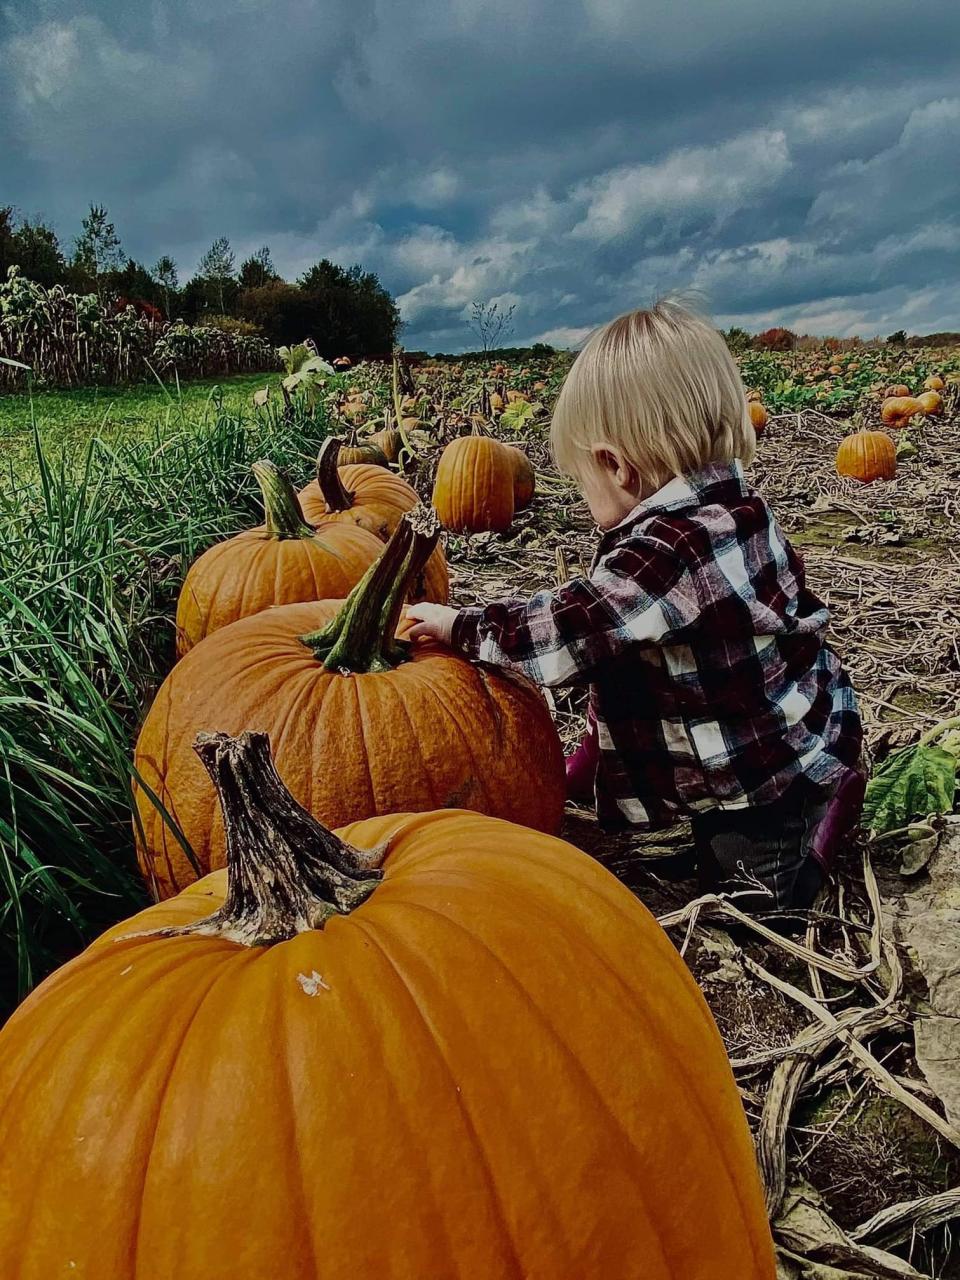 Find the perfect pumpkin this year at Arnold's Strawberries in Rudolph. This year they will host a Fall Harvest event on Oct. 1-2.